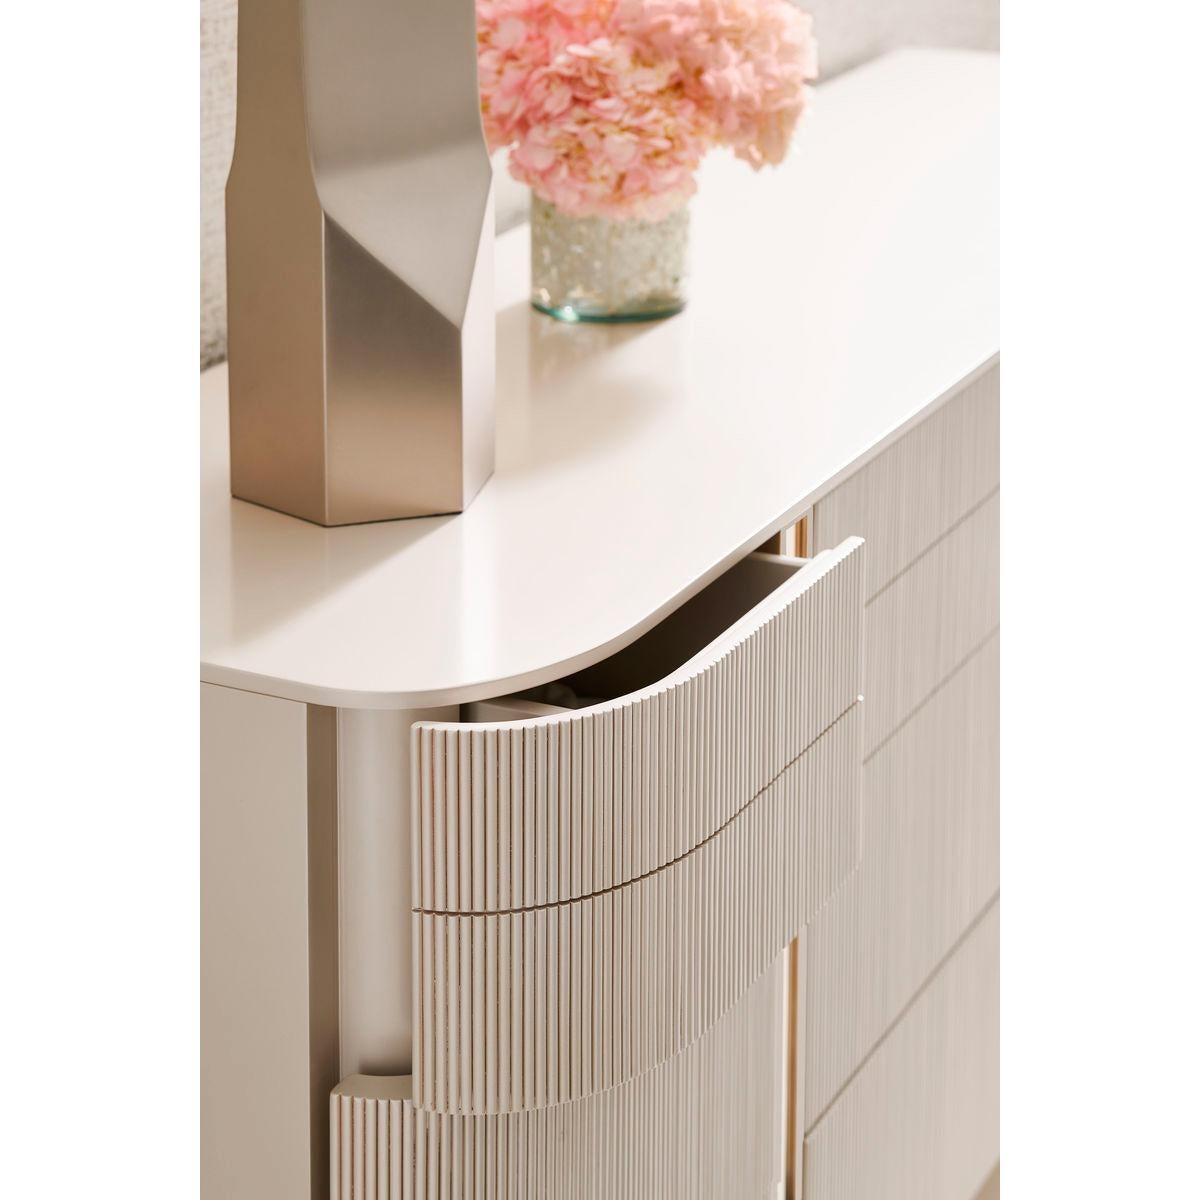 Representing the ultimate combination of form and function, it creates a space worthy of your finest clothing. All drawers are completely finished and wear Matte Pearl.

The gracefully rounded profile of its fashion-forward design adds visual appeal